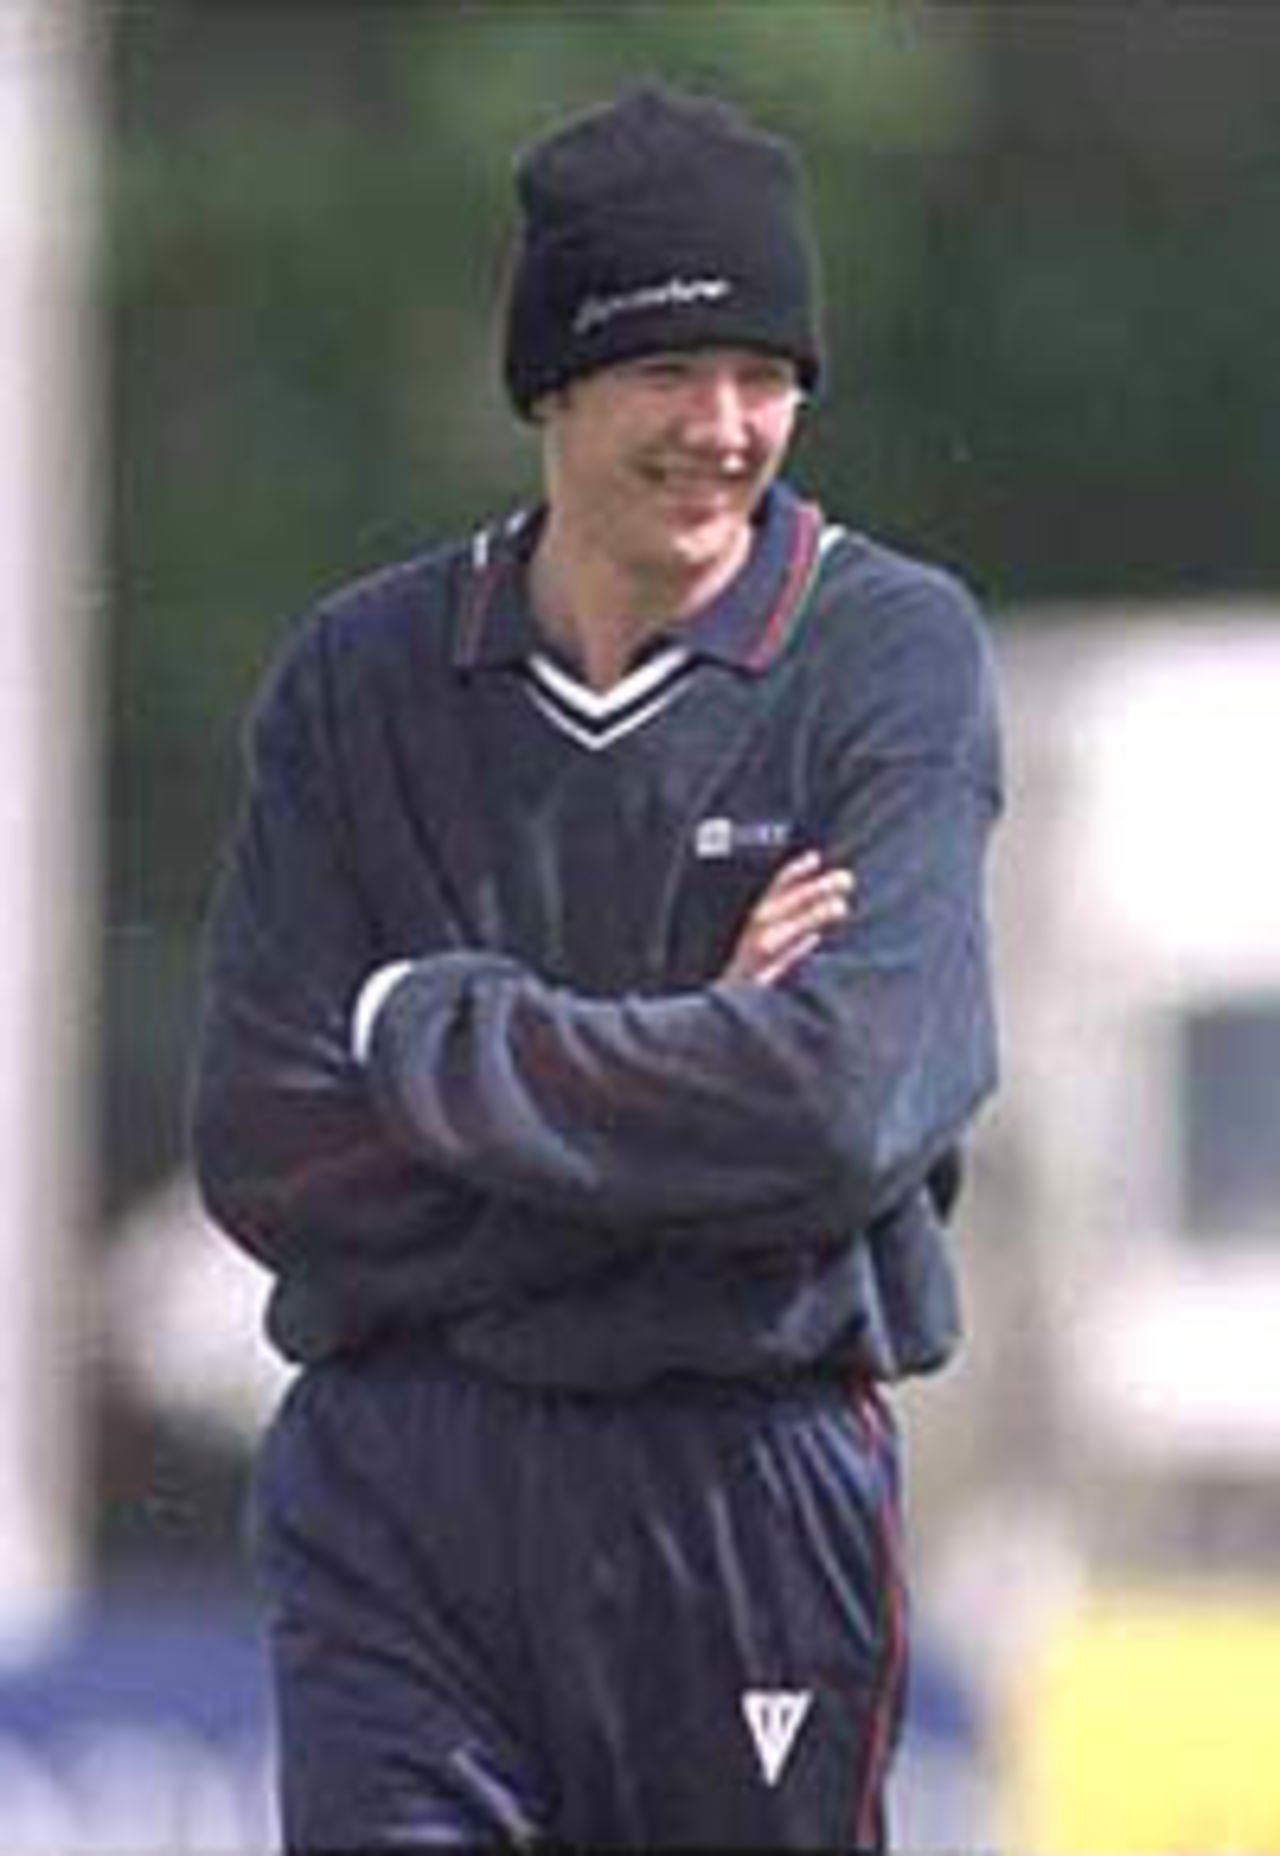 Chris Schofield feels cold while training, Benson & Hedges Cup, 2000, 2nd Semi Final, Gloucestershire v Lancashire,  The Royal & Sun Alliance County Ground, Bristol, 28-29 May 2000.